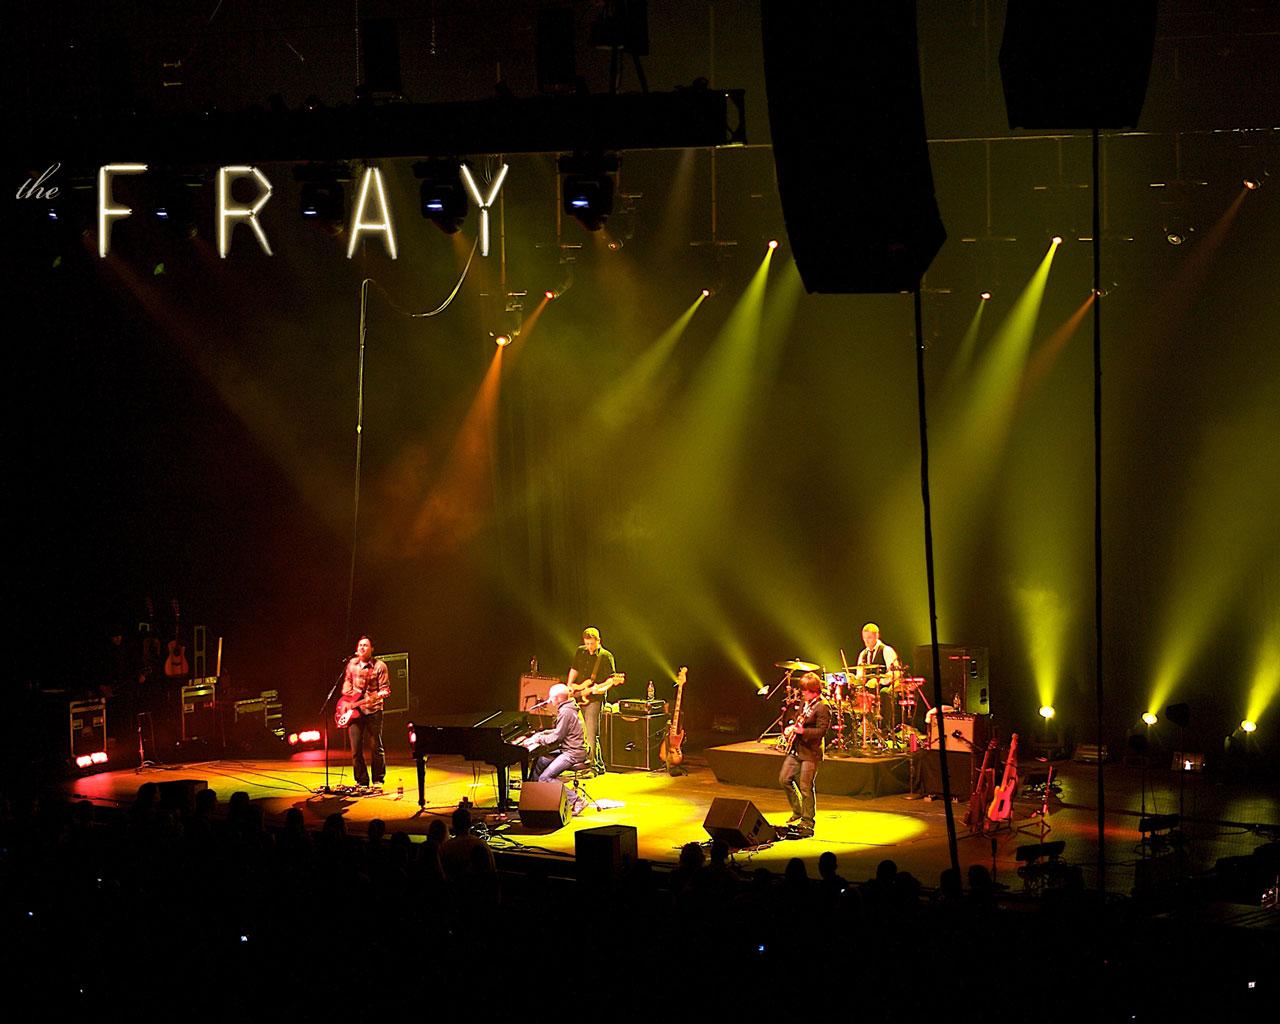 The Fray -  Wallpaper #1 1280 x 1024 